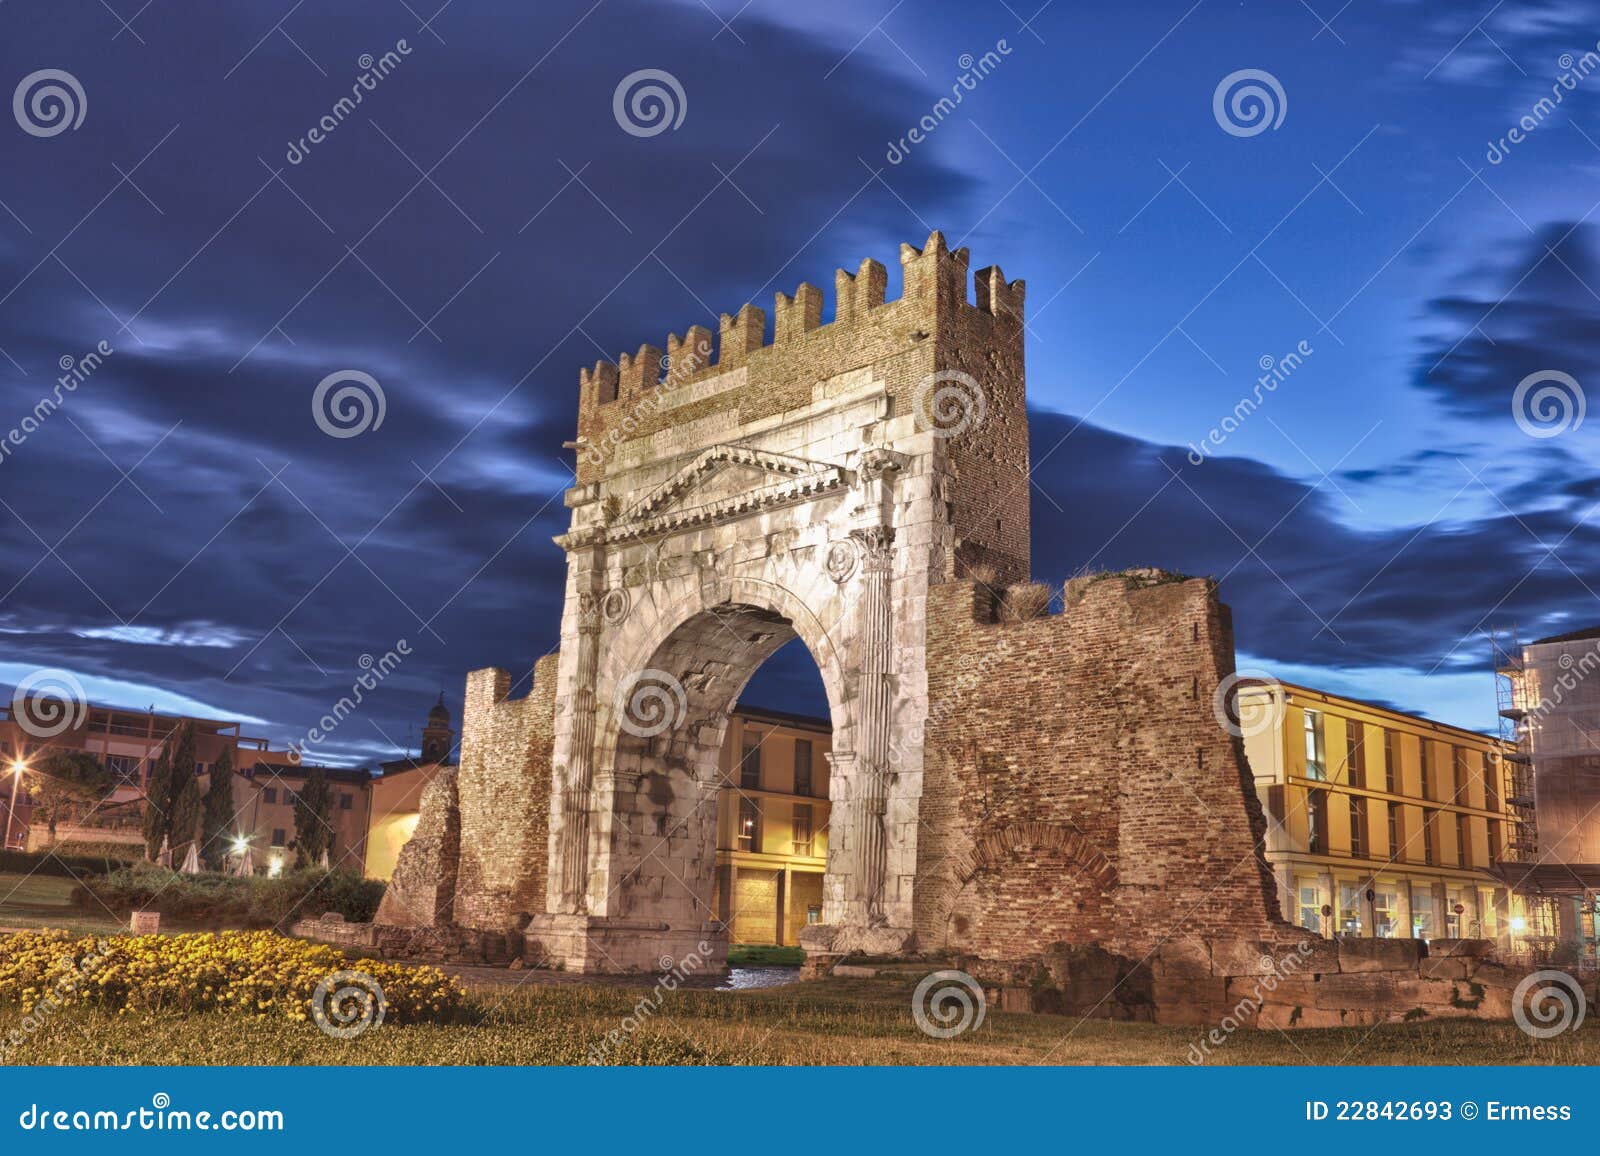 rimini, the arch of augustus - hdr